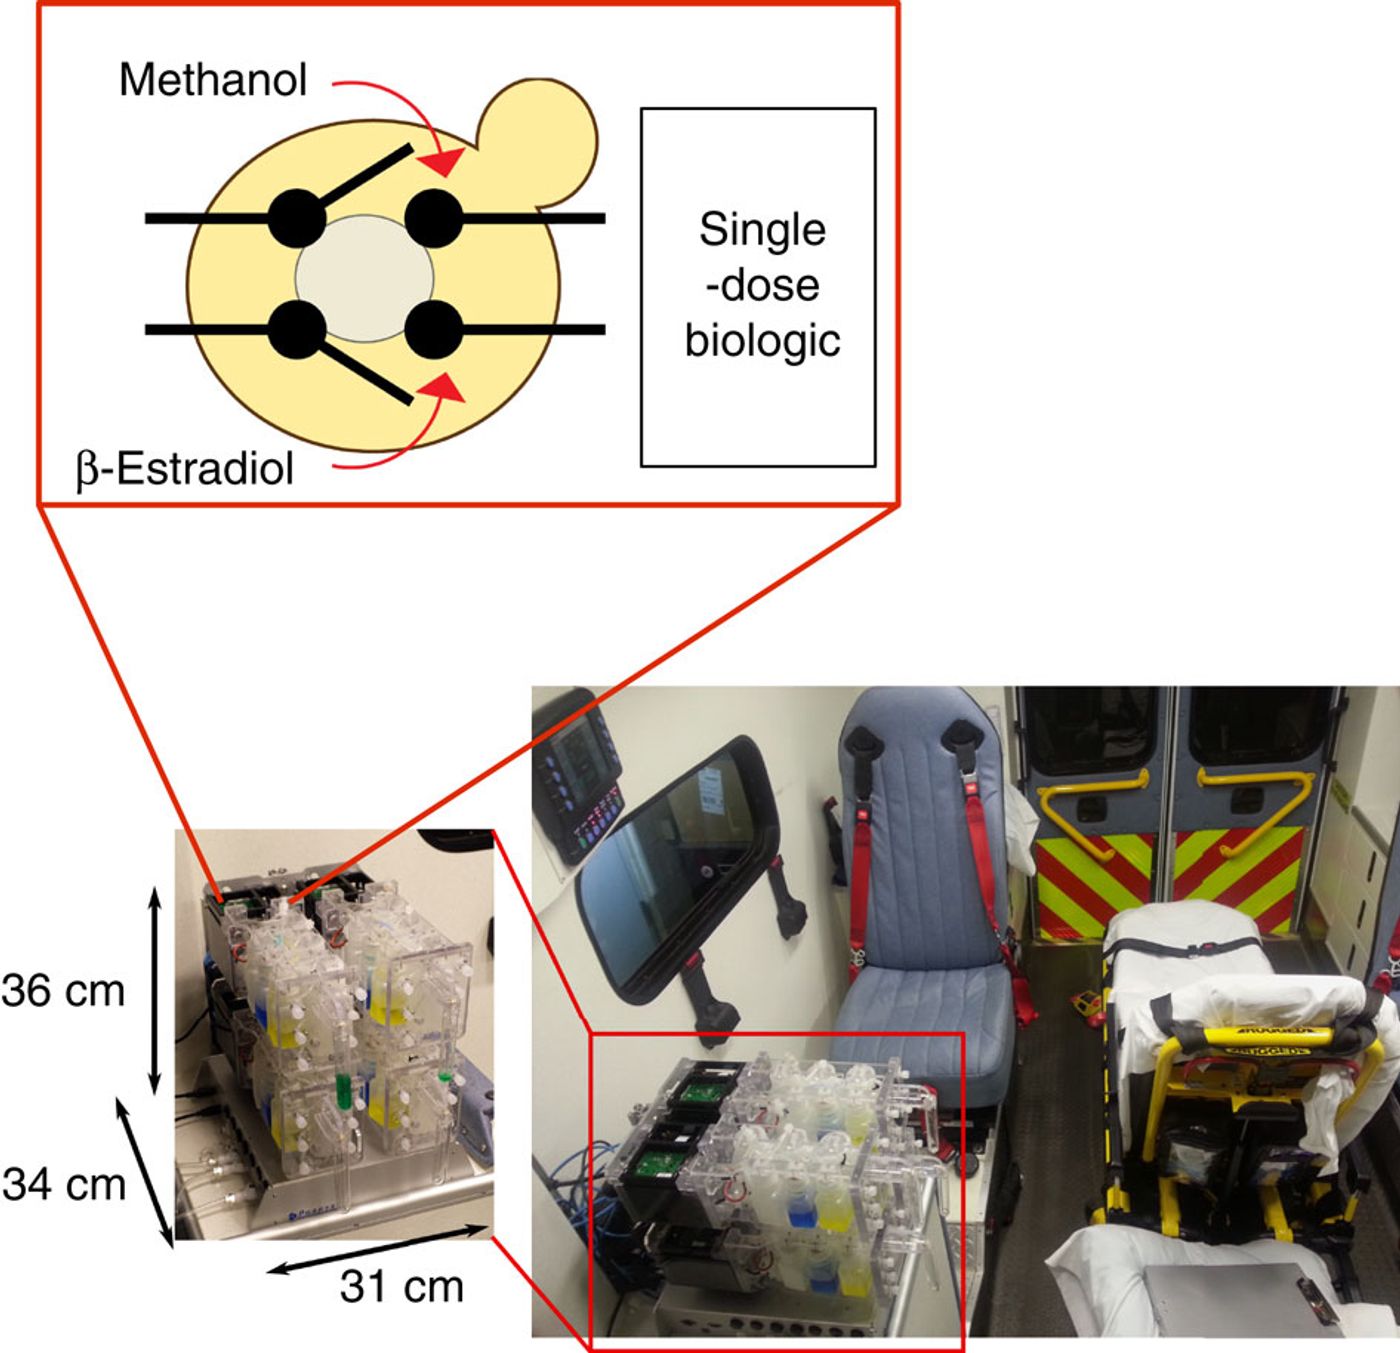 Microbioreactor system in the context of an ambulance.